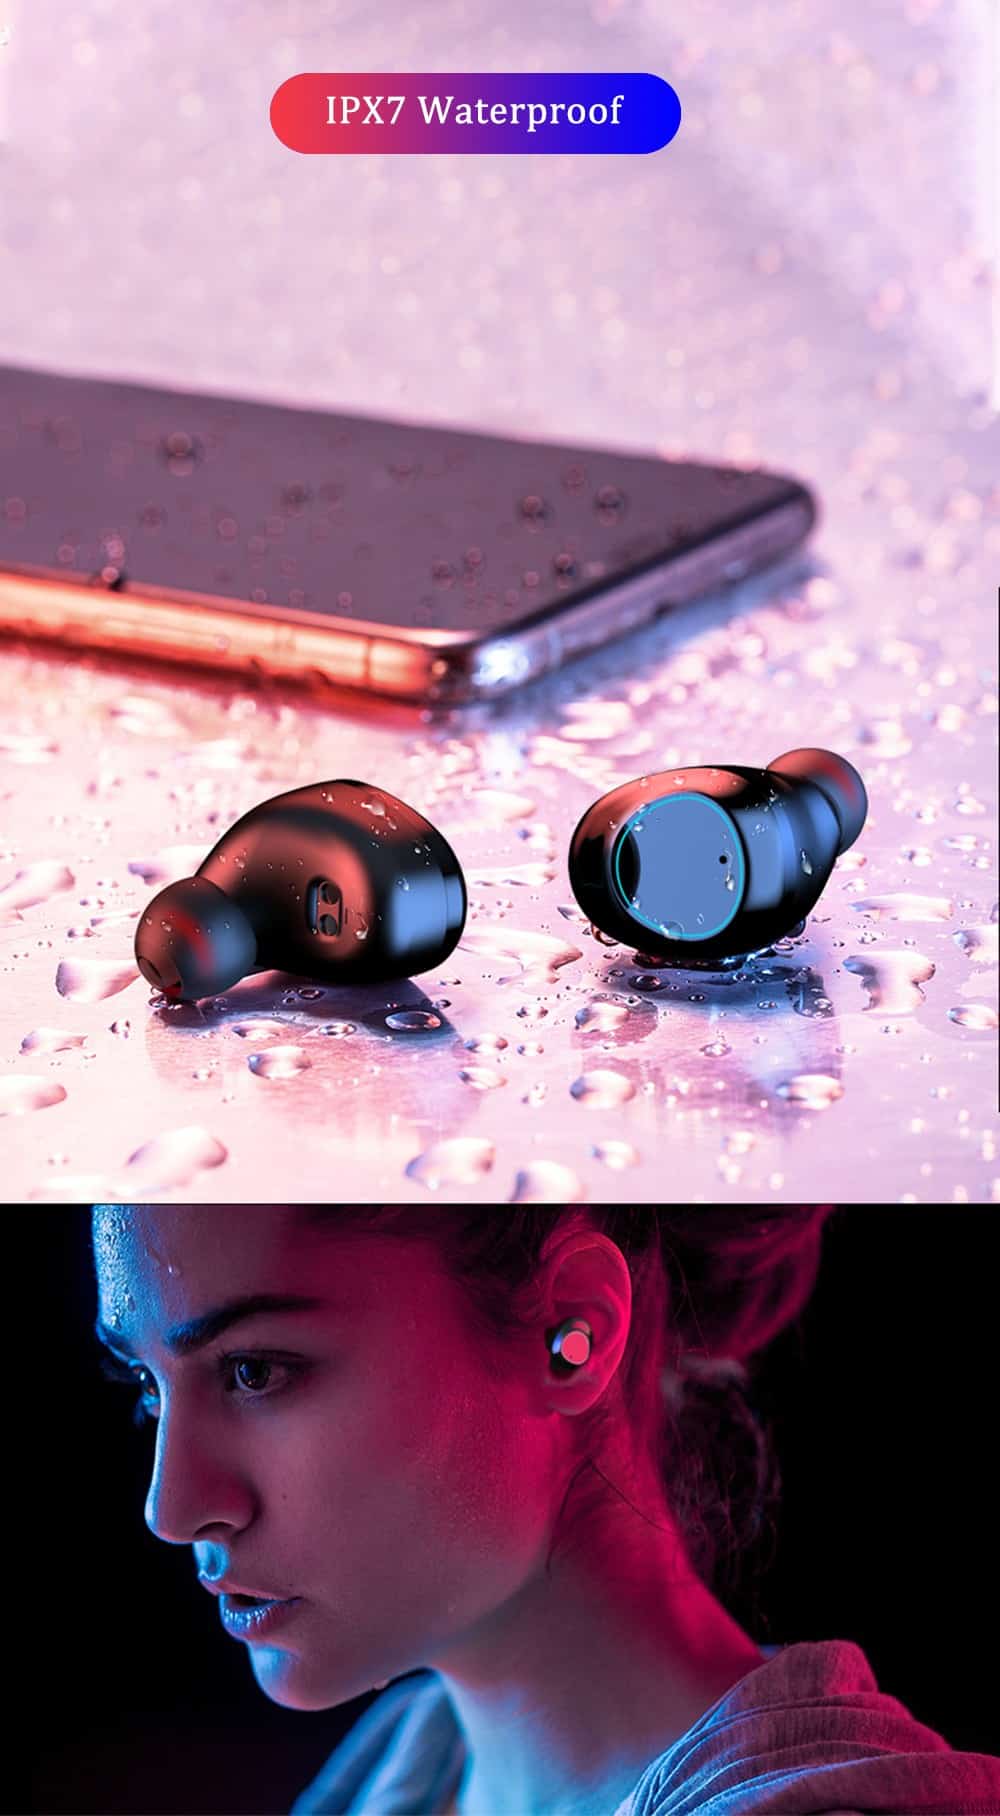 Bluetooth 5.0 Earphones 3500mah Wireless Headphones IPX7 Waterproof Touch Control TWS Earbuds With Microphone LED Display Red